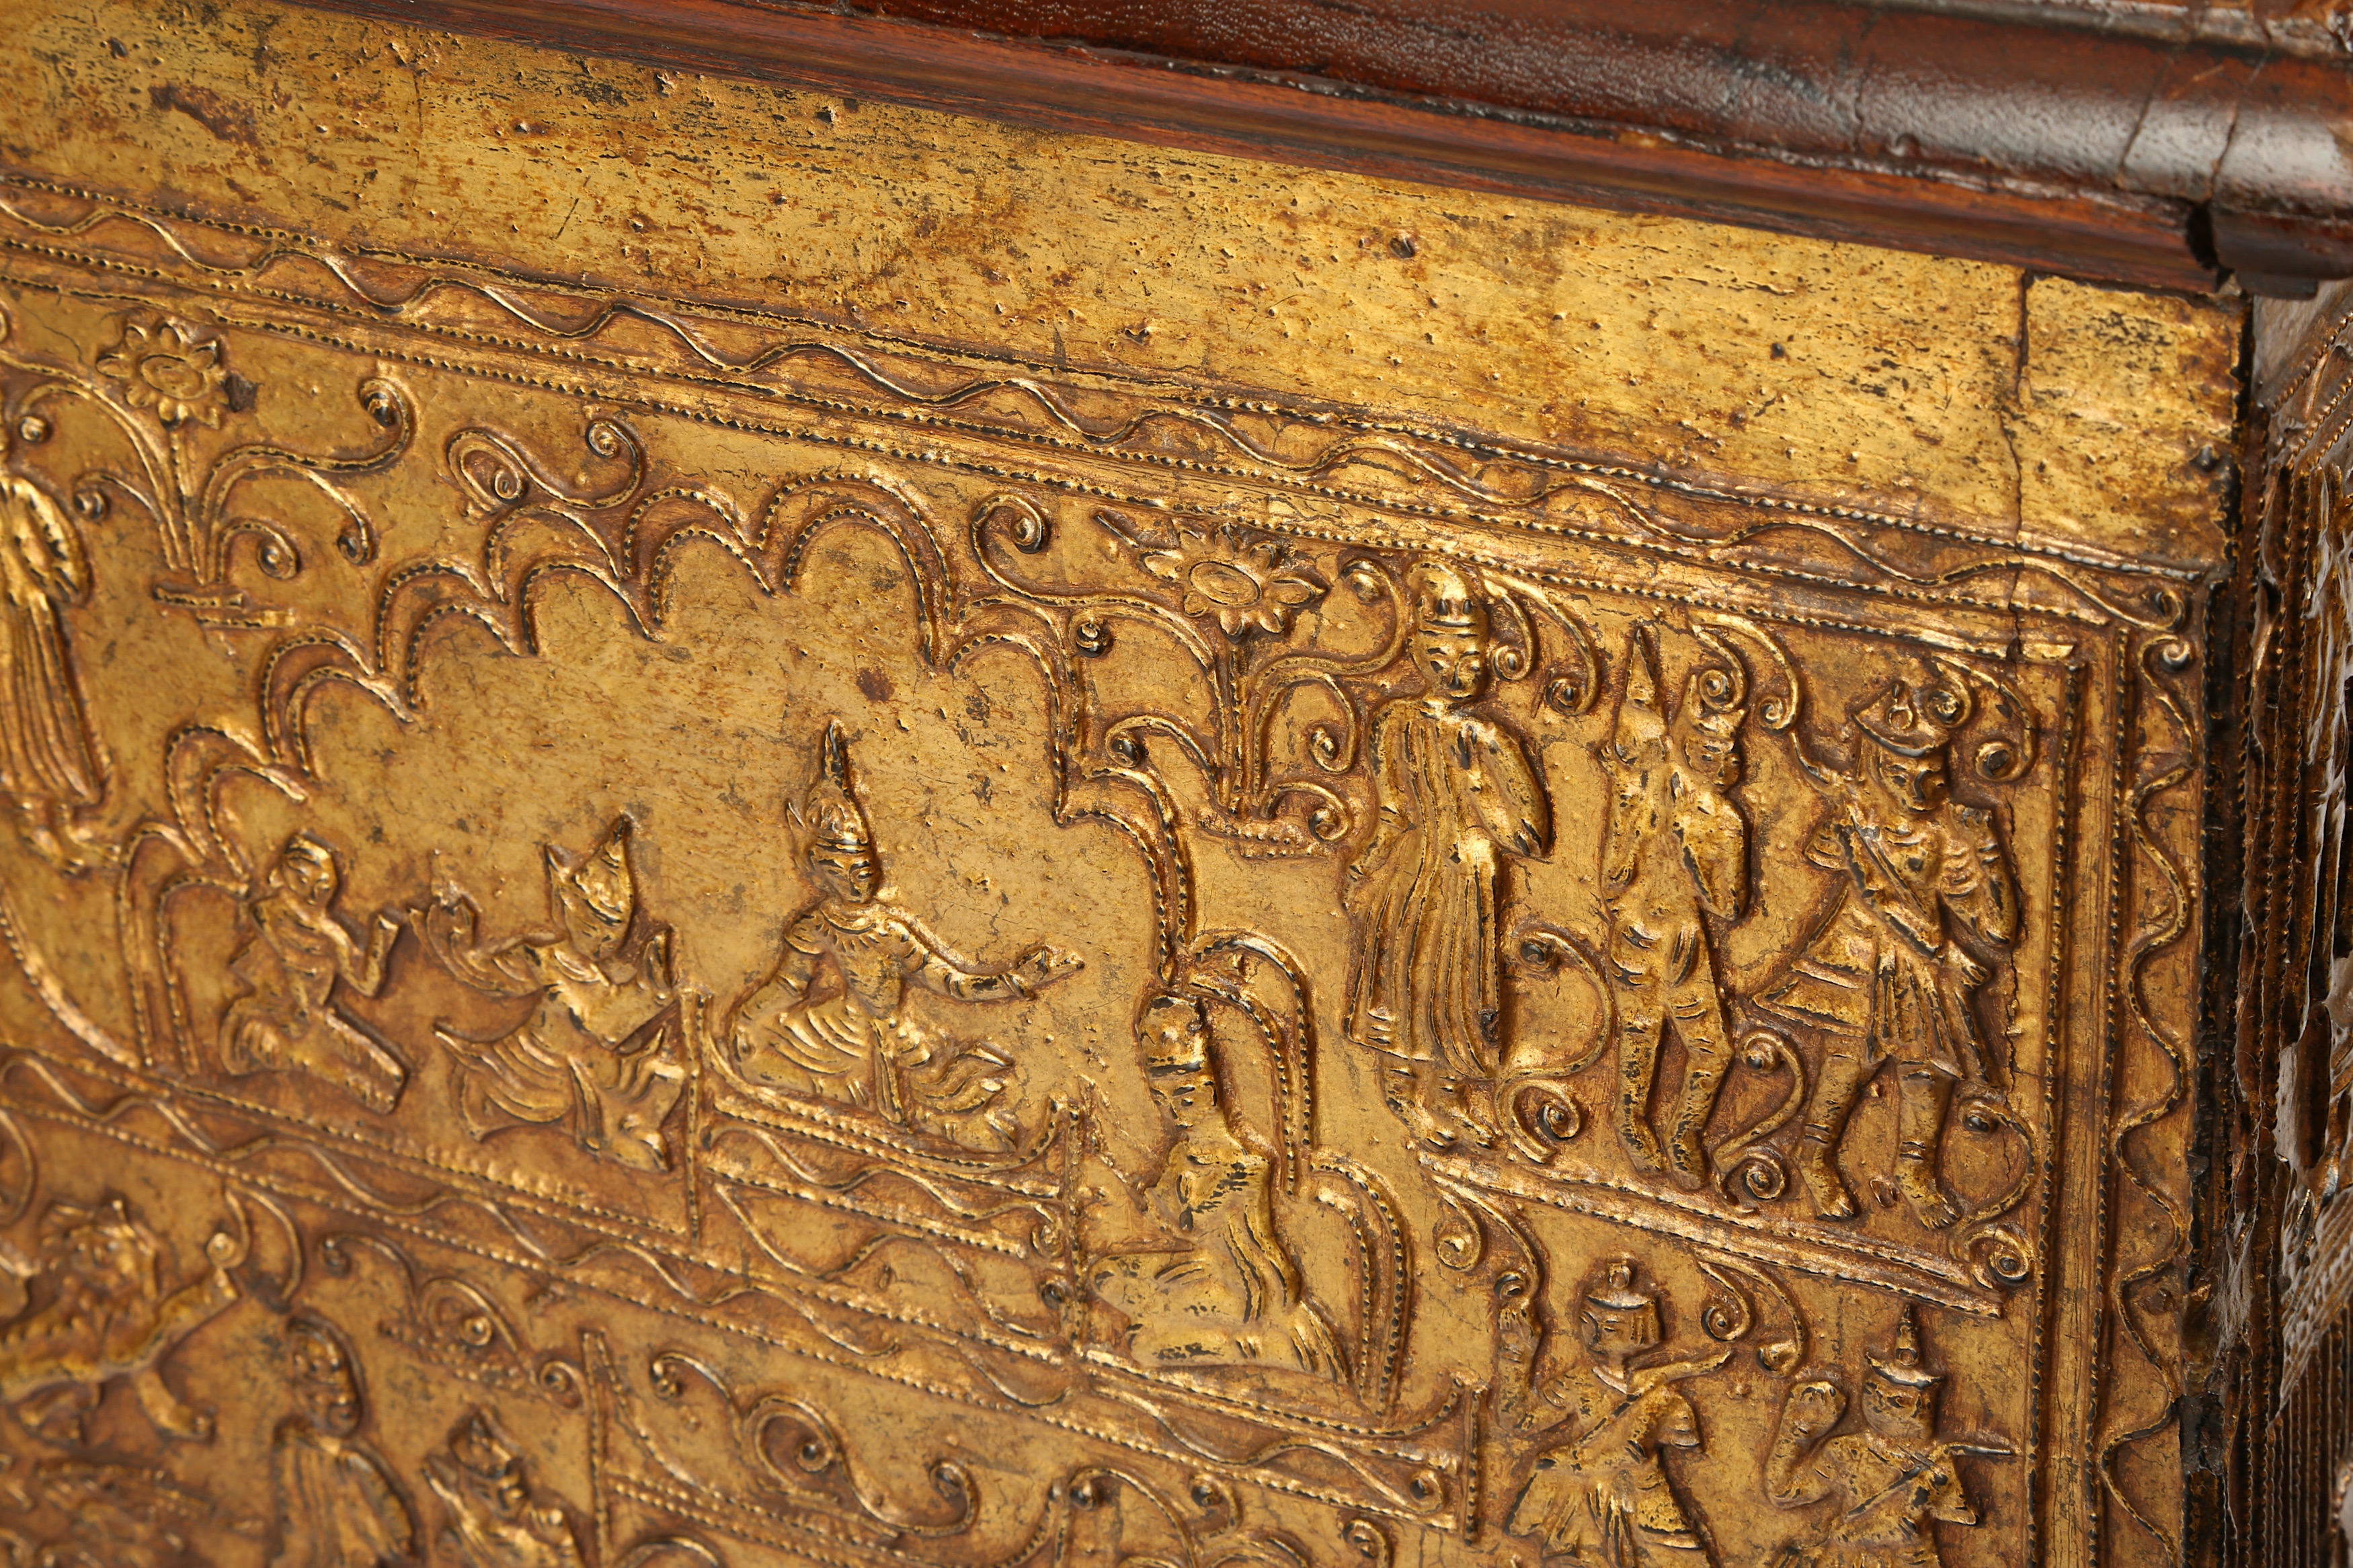 A GILDED LACQUER AND GESSO MANUSCRIPT STORAGE CABINET - Image 4 of 7